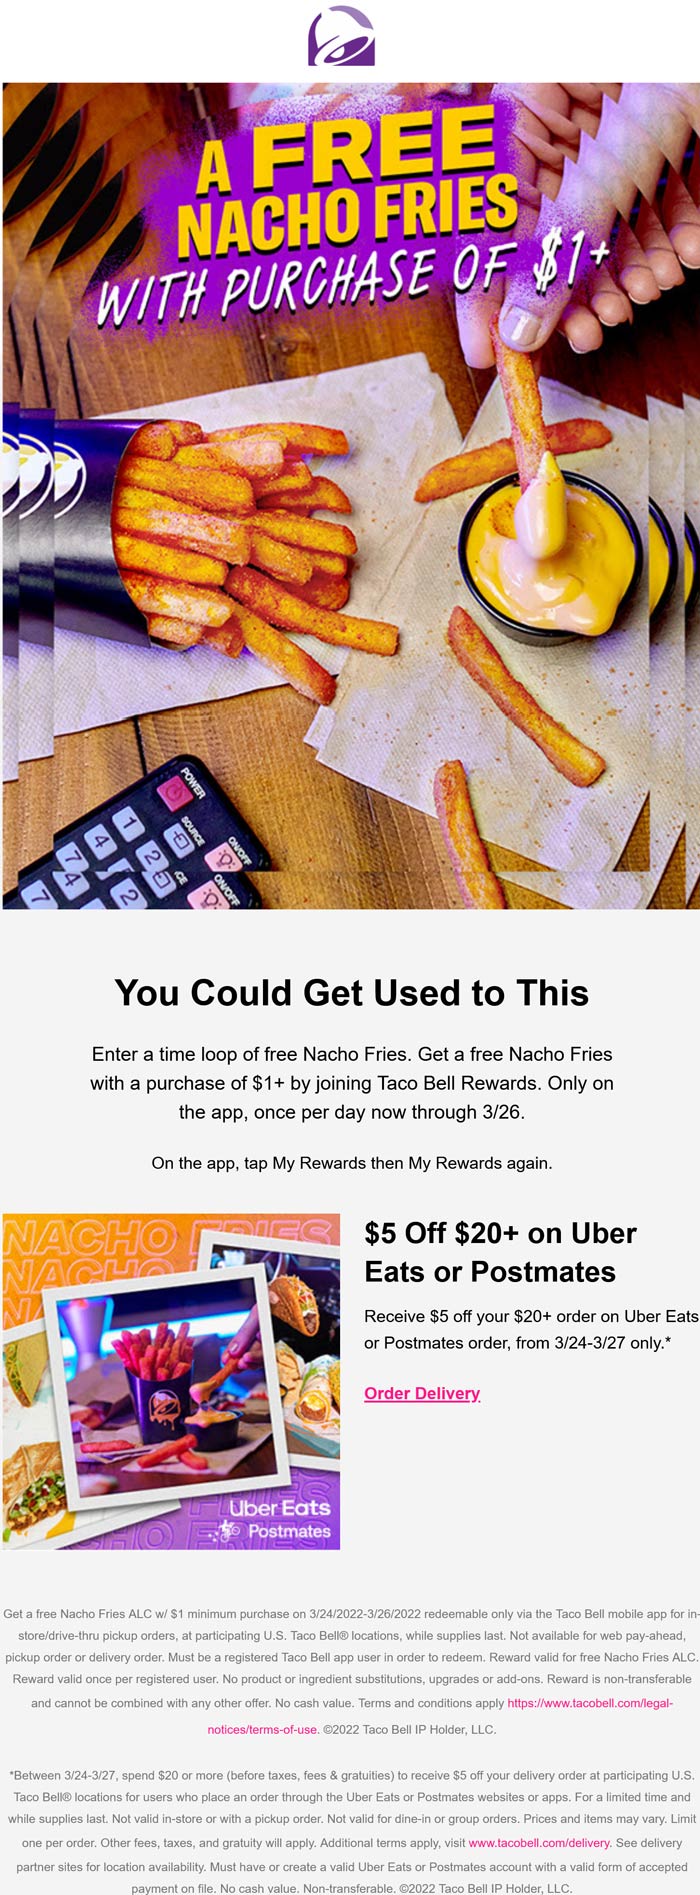 Taco Bell restaurants Coupon  Free nacho fries daily on $1 via rewards at Taco Bell #tacobell 